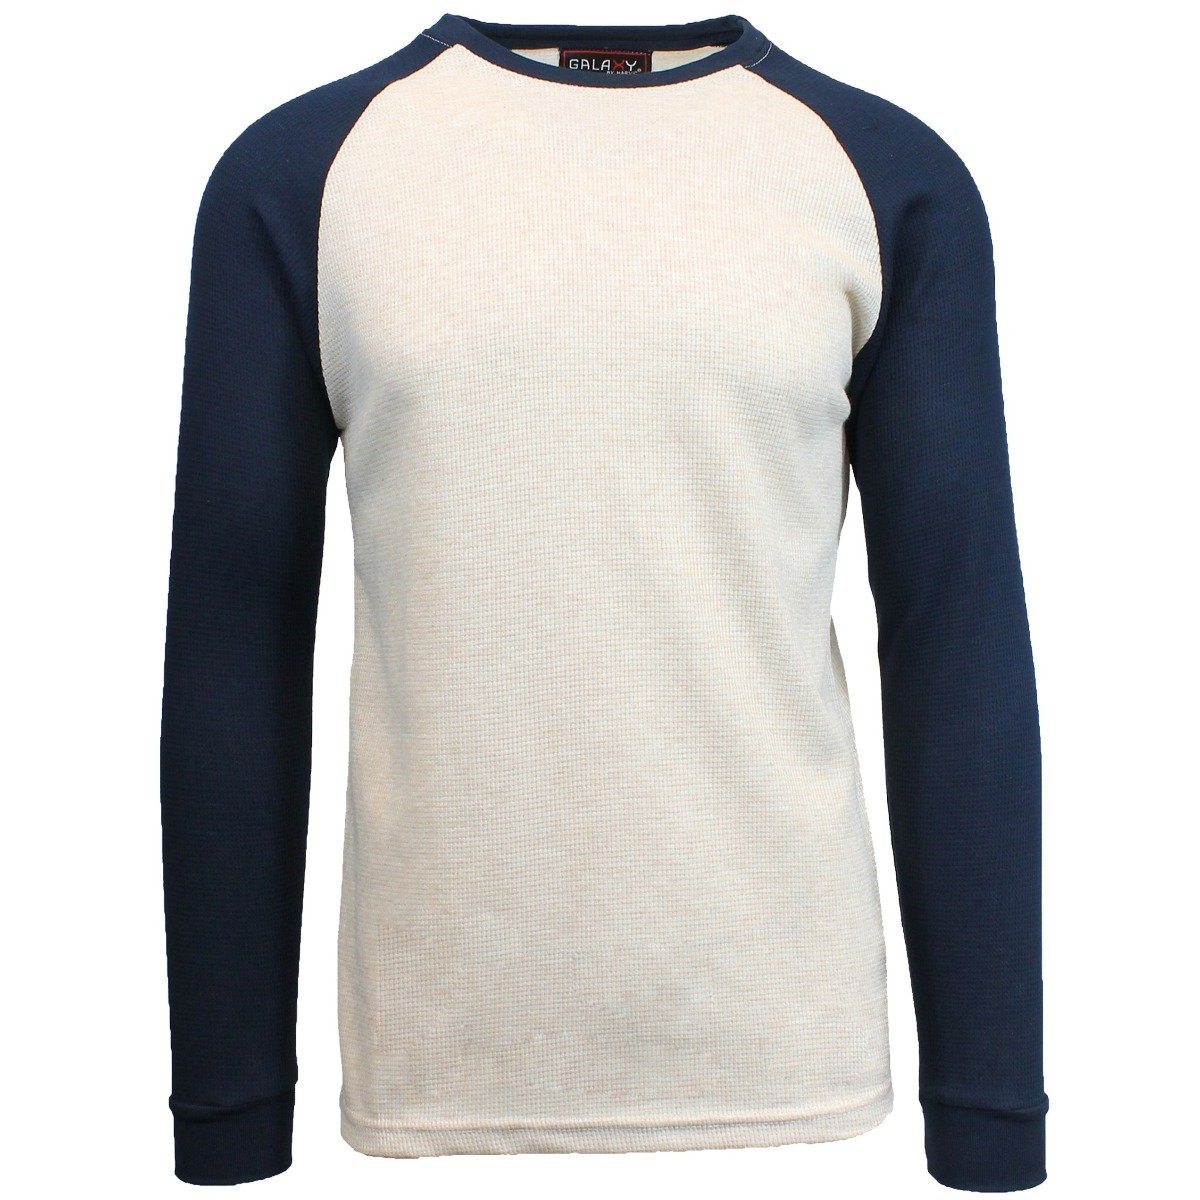 Galaxy by Harvic Men&#39;s Raglan Thermal Shirt - Assorted Sizes / Oatmeal/Navy Blue / Large